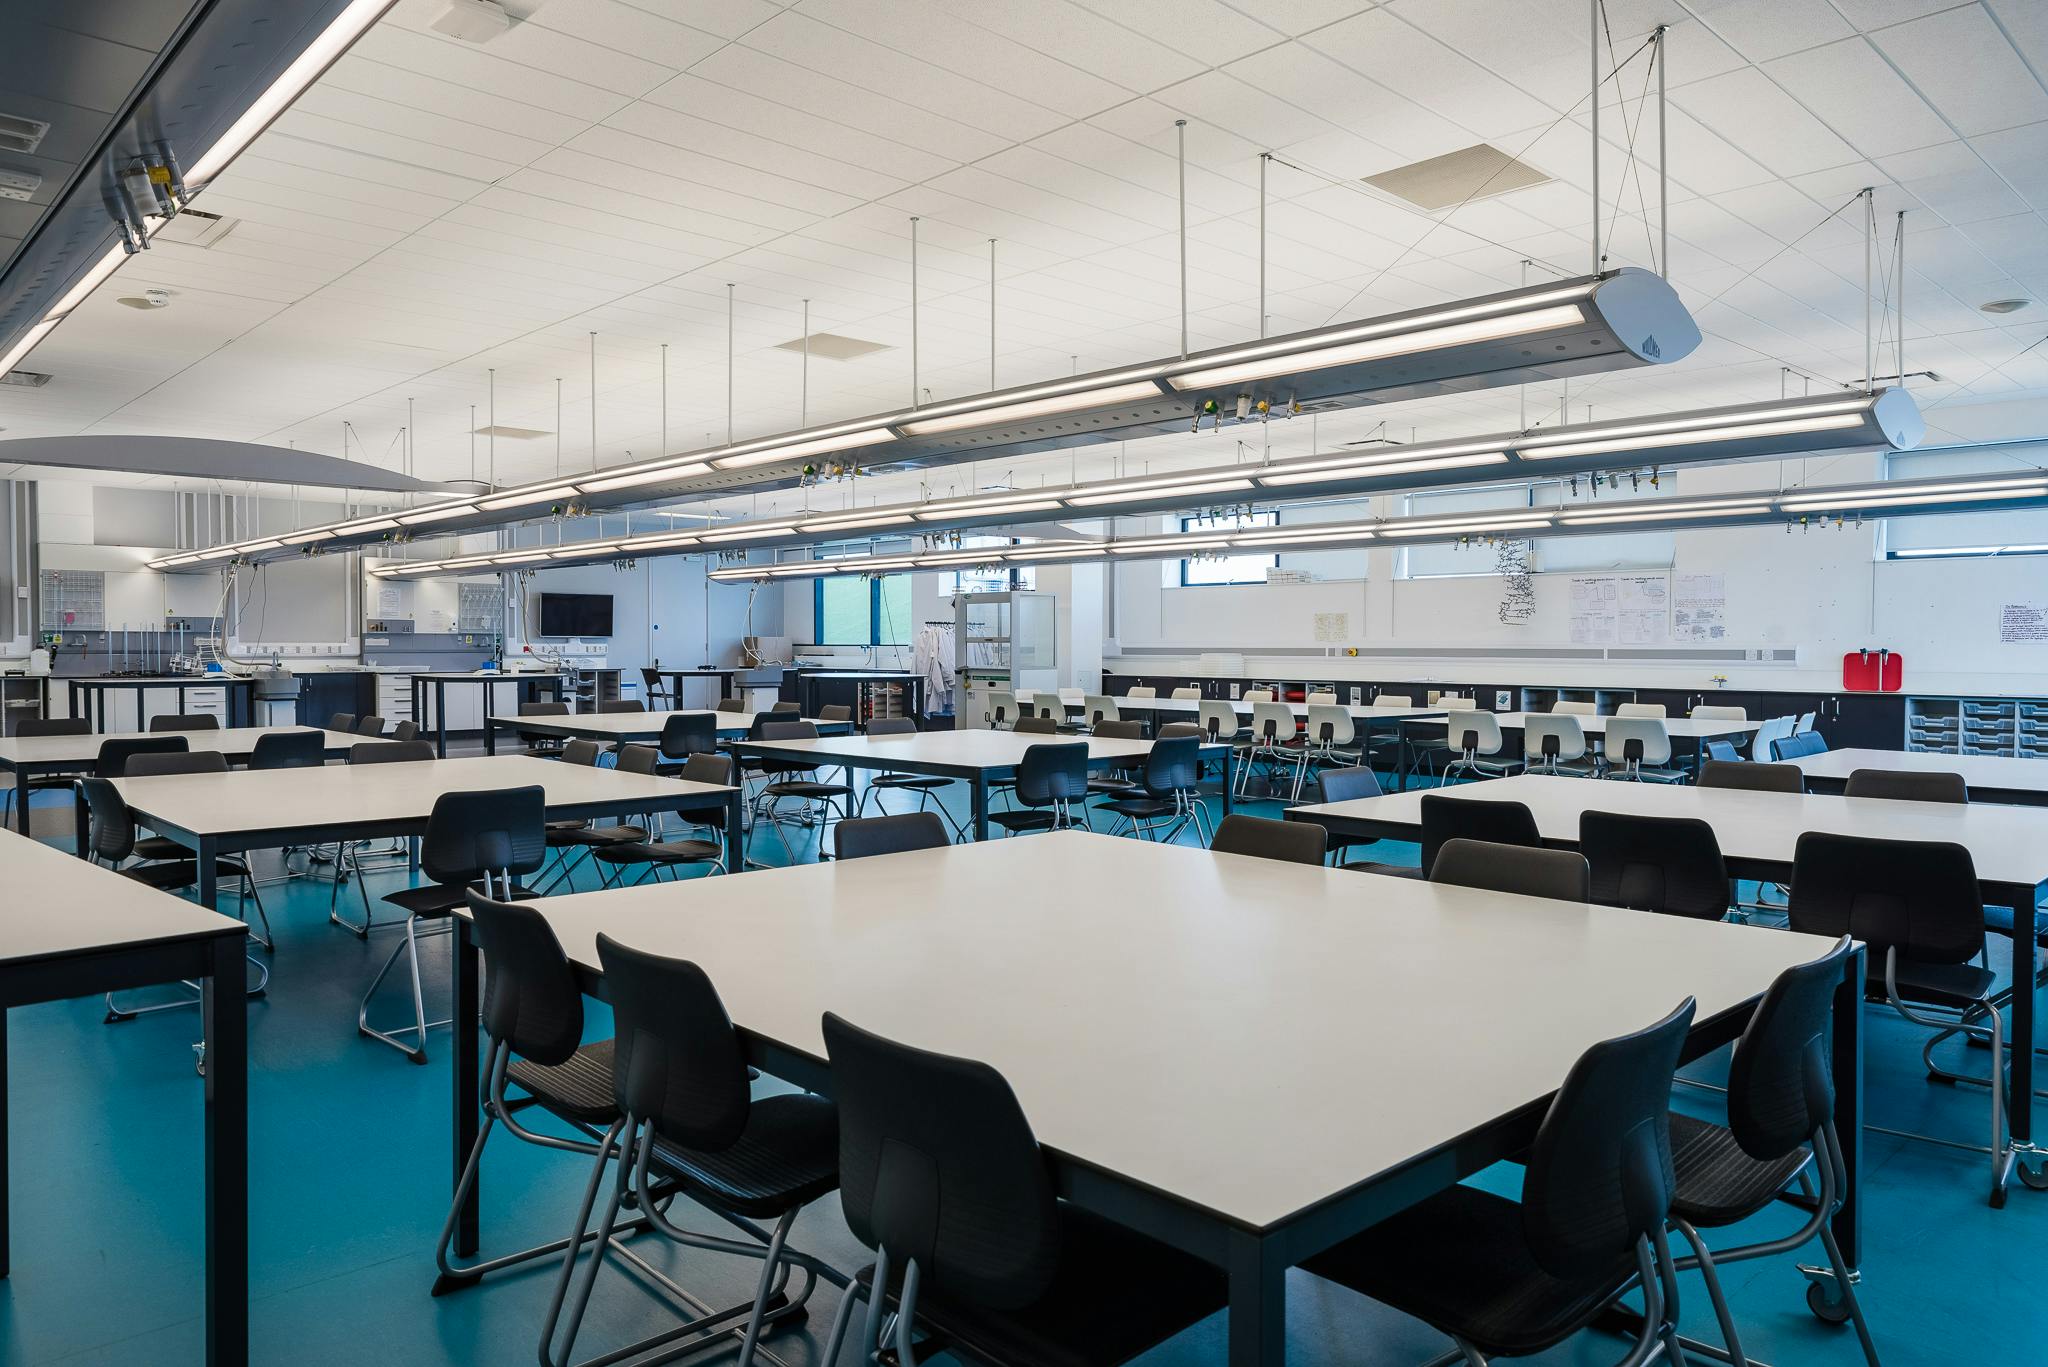 London Academy of Excellence Tottenham - Science classroom / Laboratory image 4